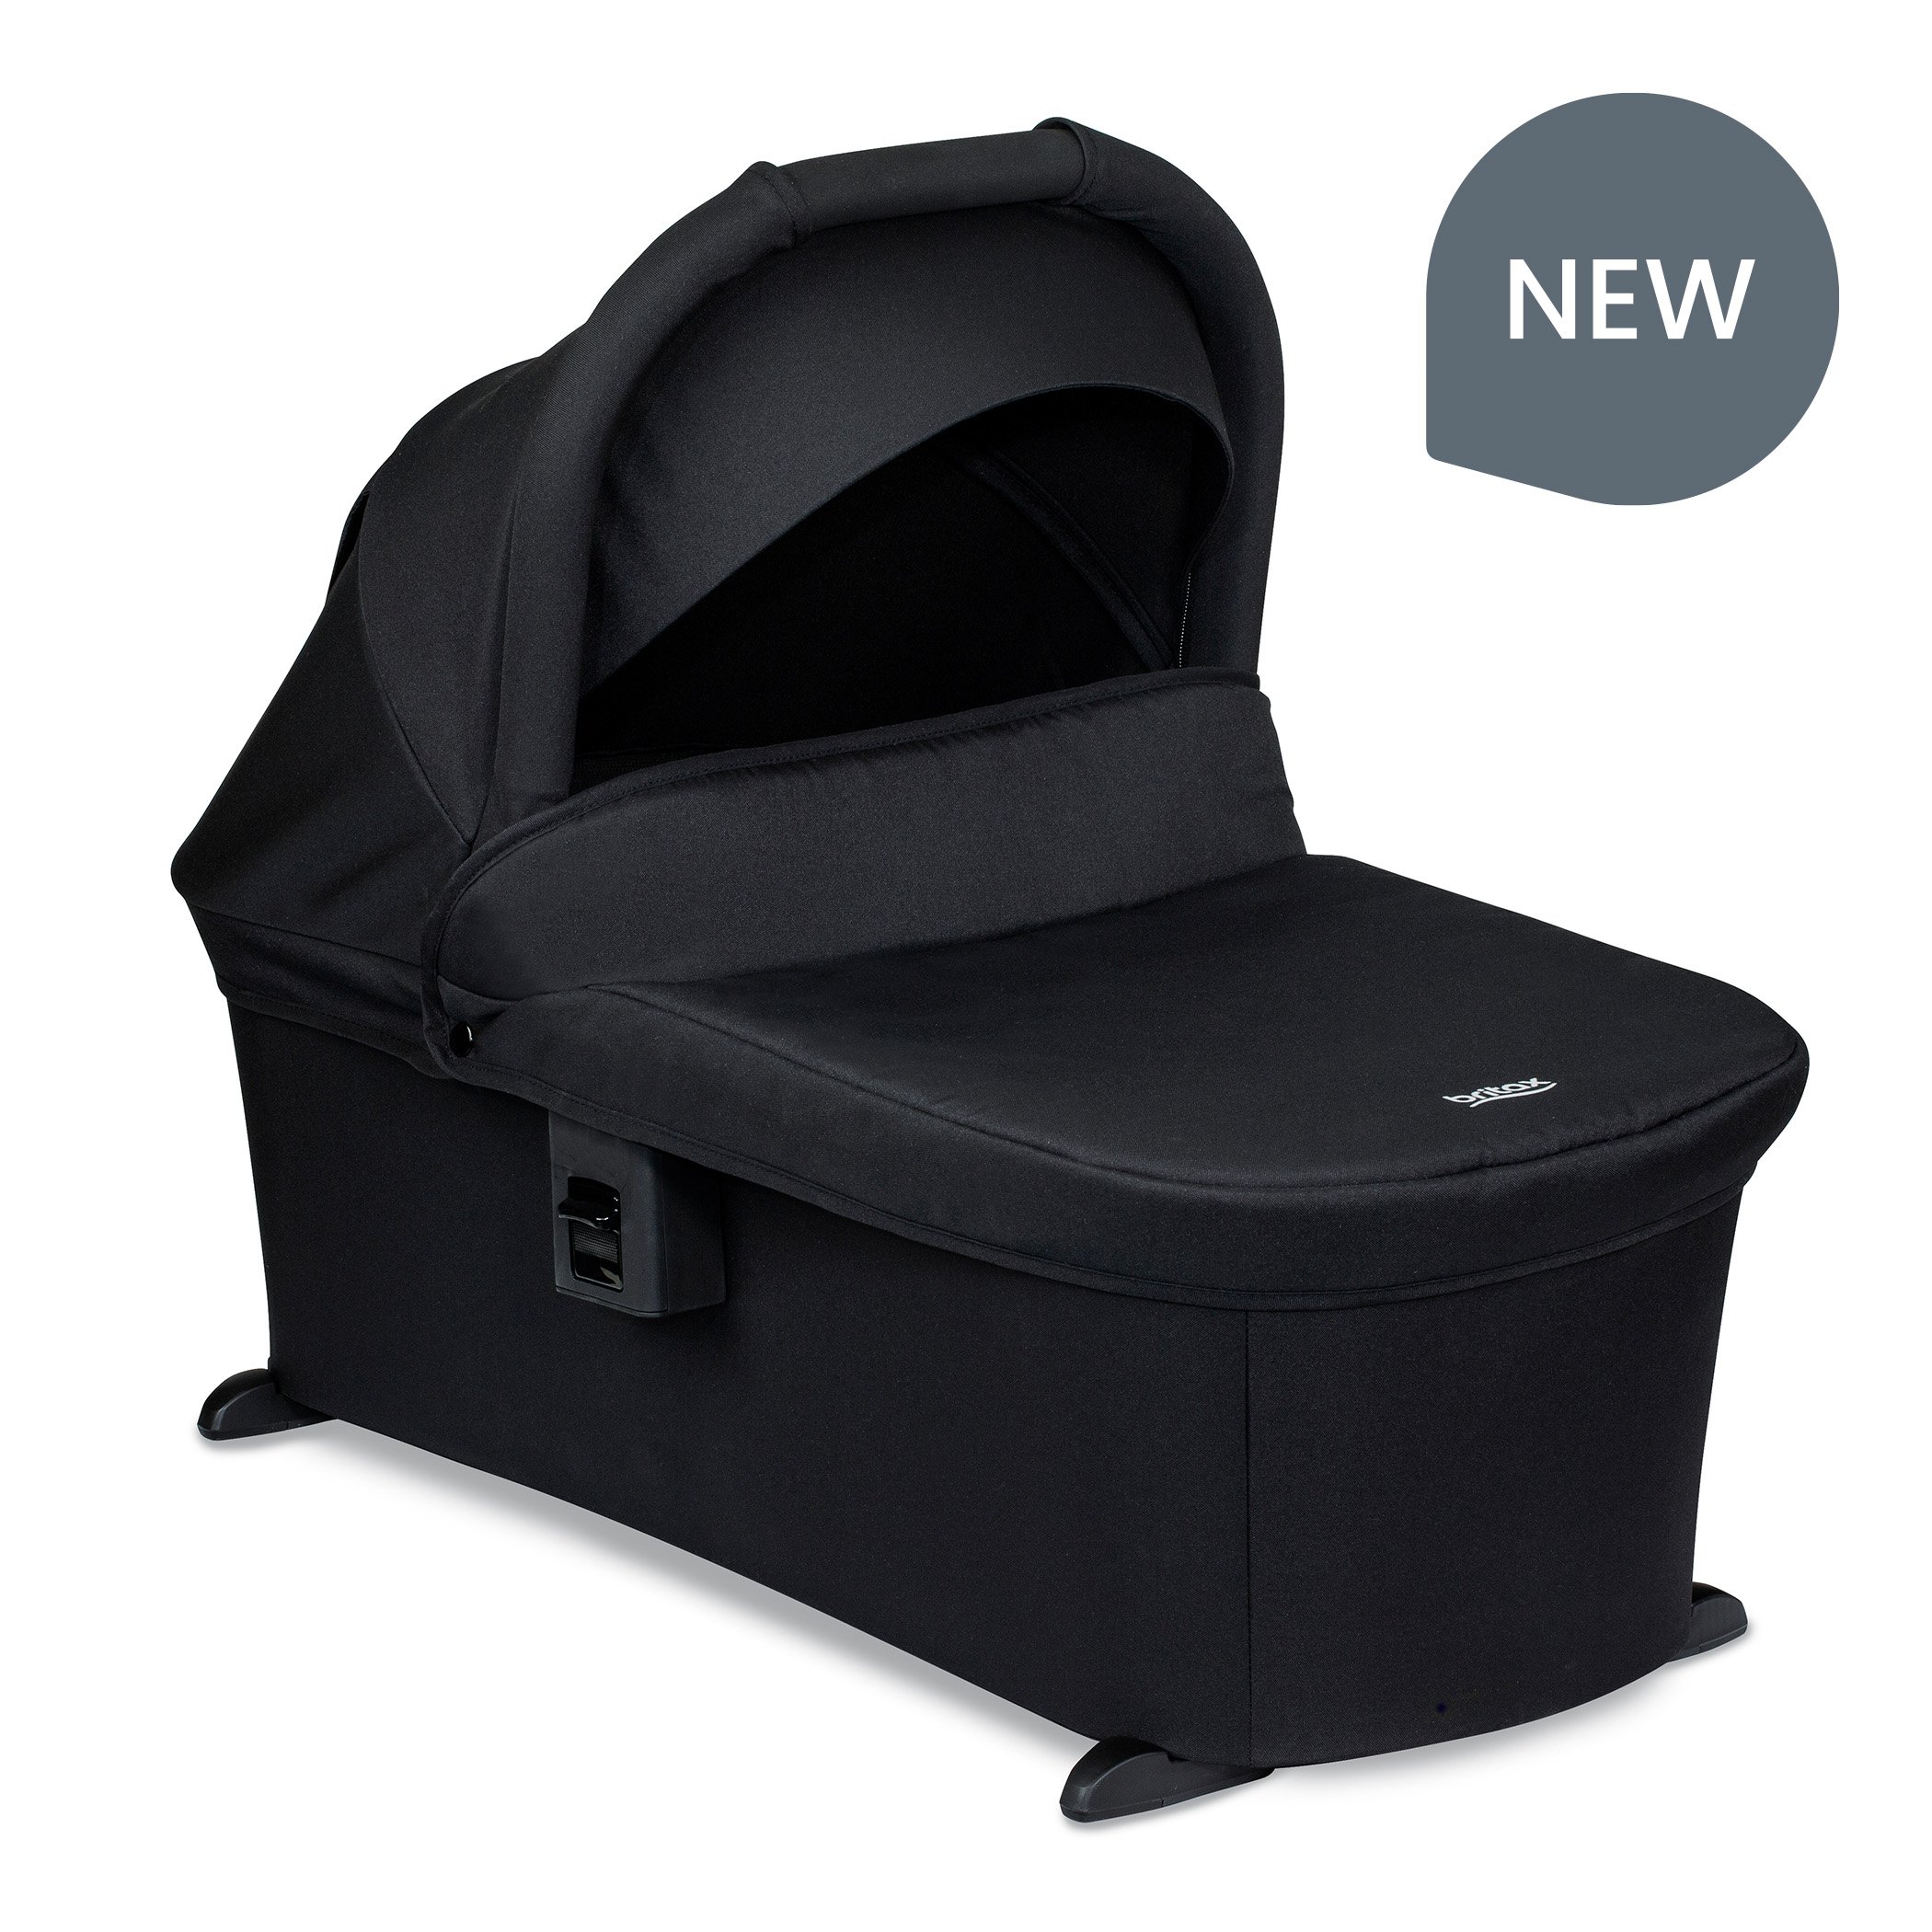 Zinnia Bassinet with NEW callout (Copy)